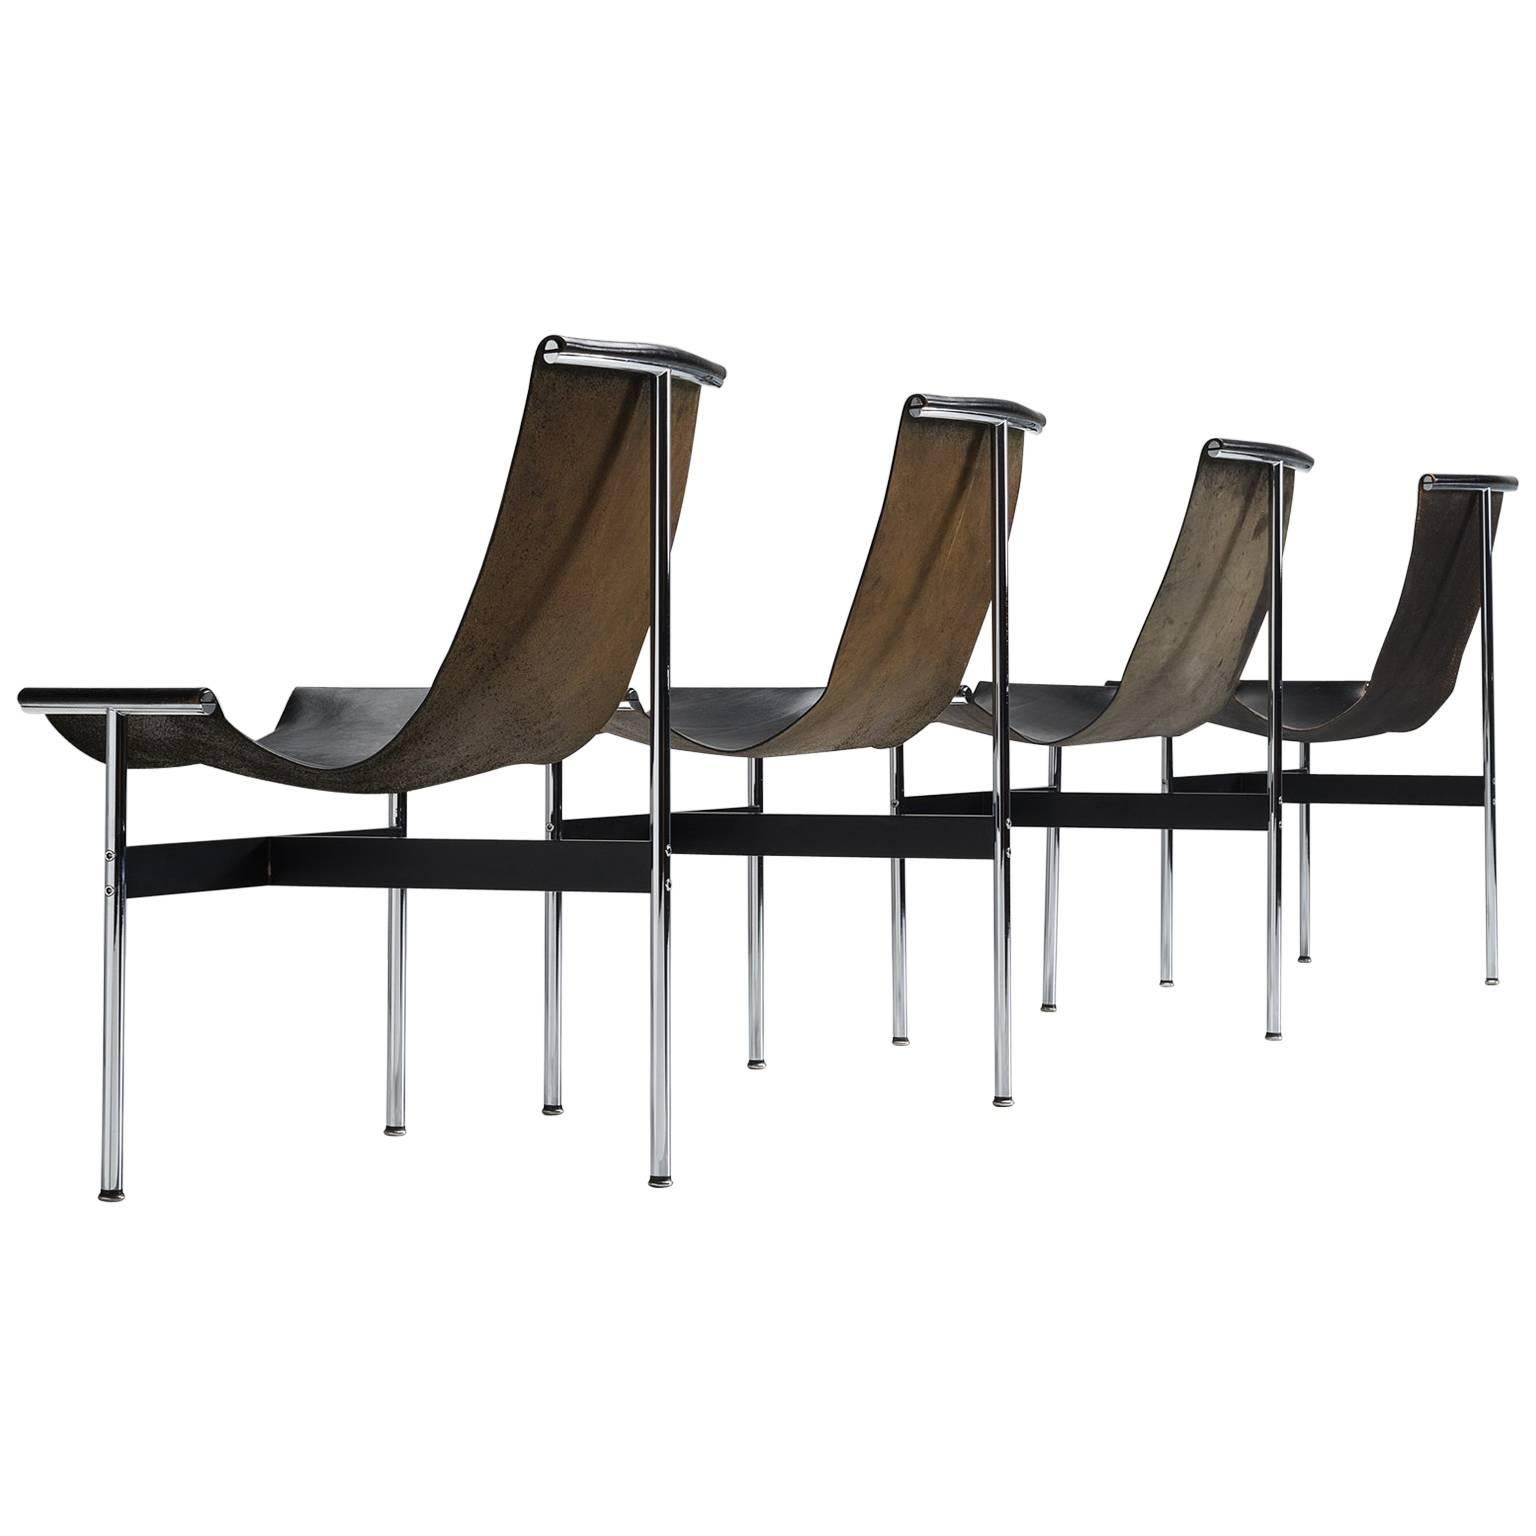 Katavolos, Kelly and Littell T-Chairs in Original Black Leather